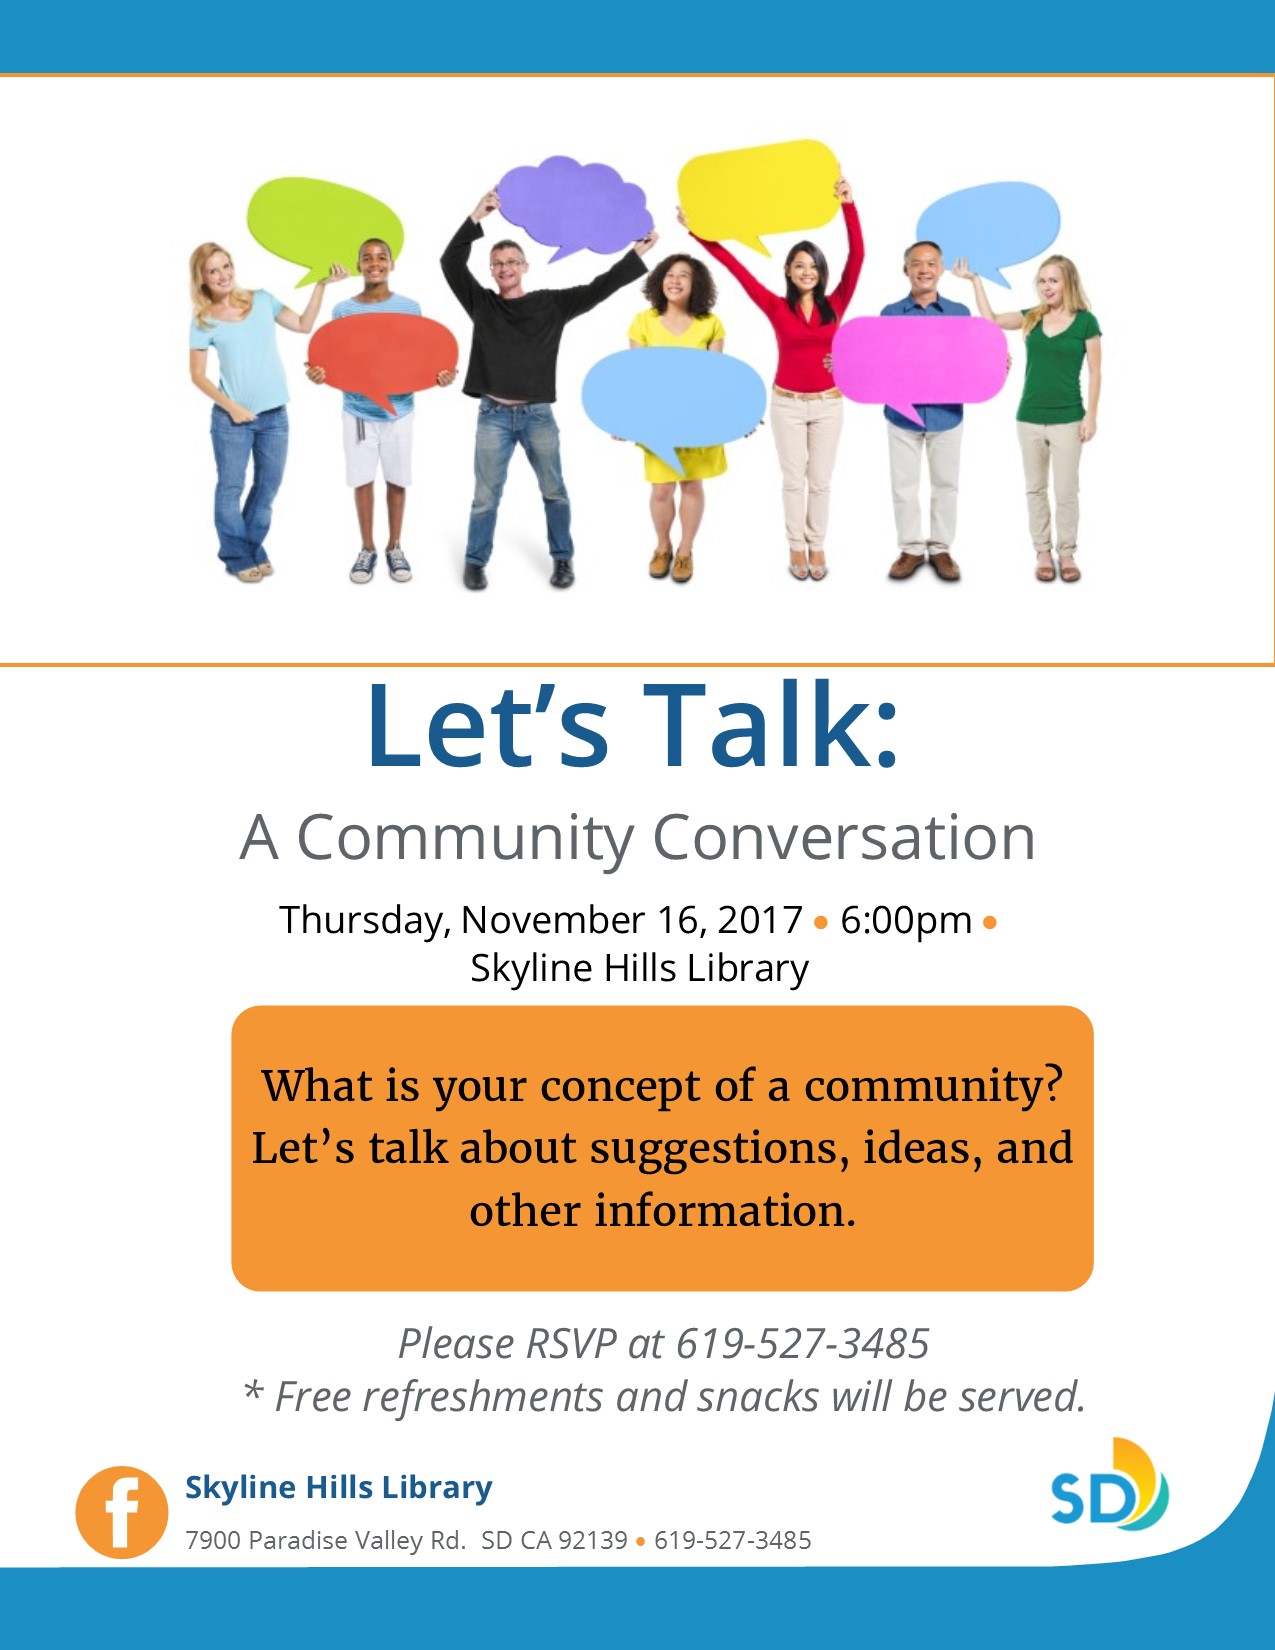 Please join us for a Community Conversation!